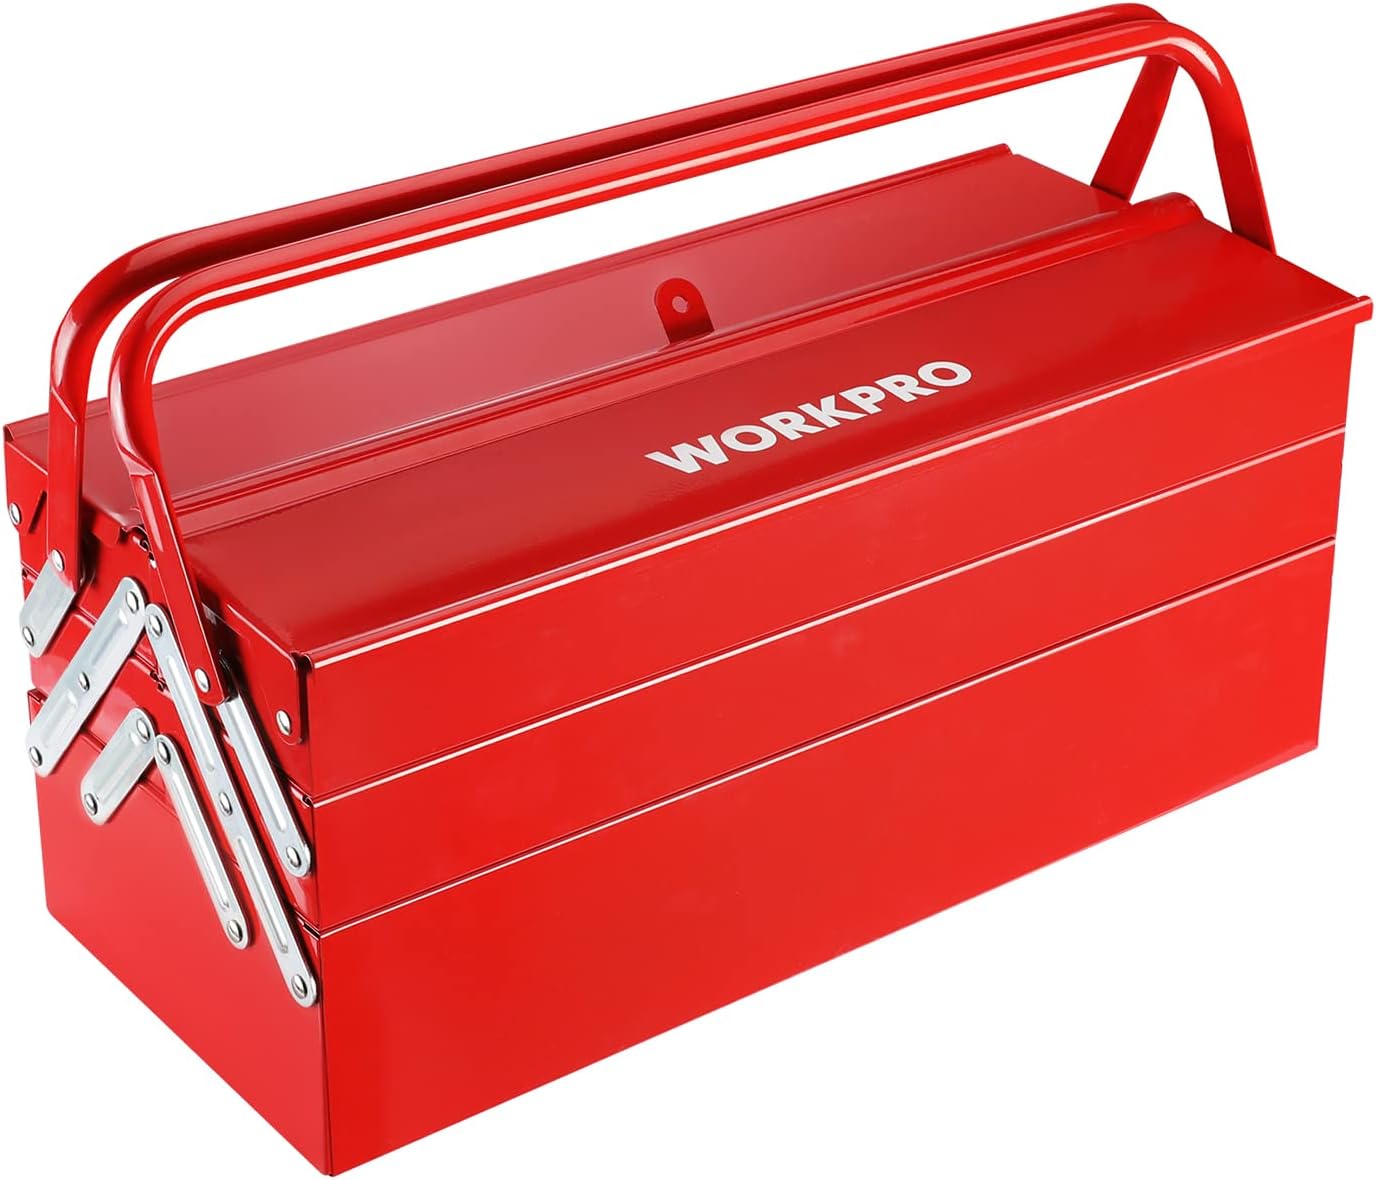 WORKPRO Metal Tool Box, 18-inch Cantilever Folding Red [...]